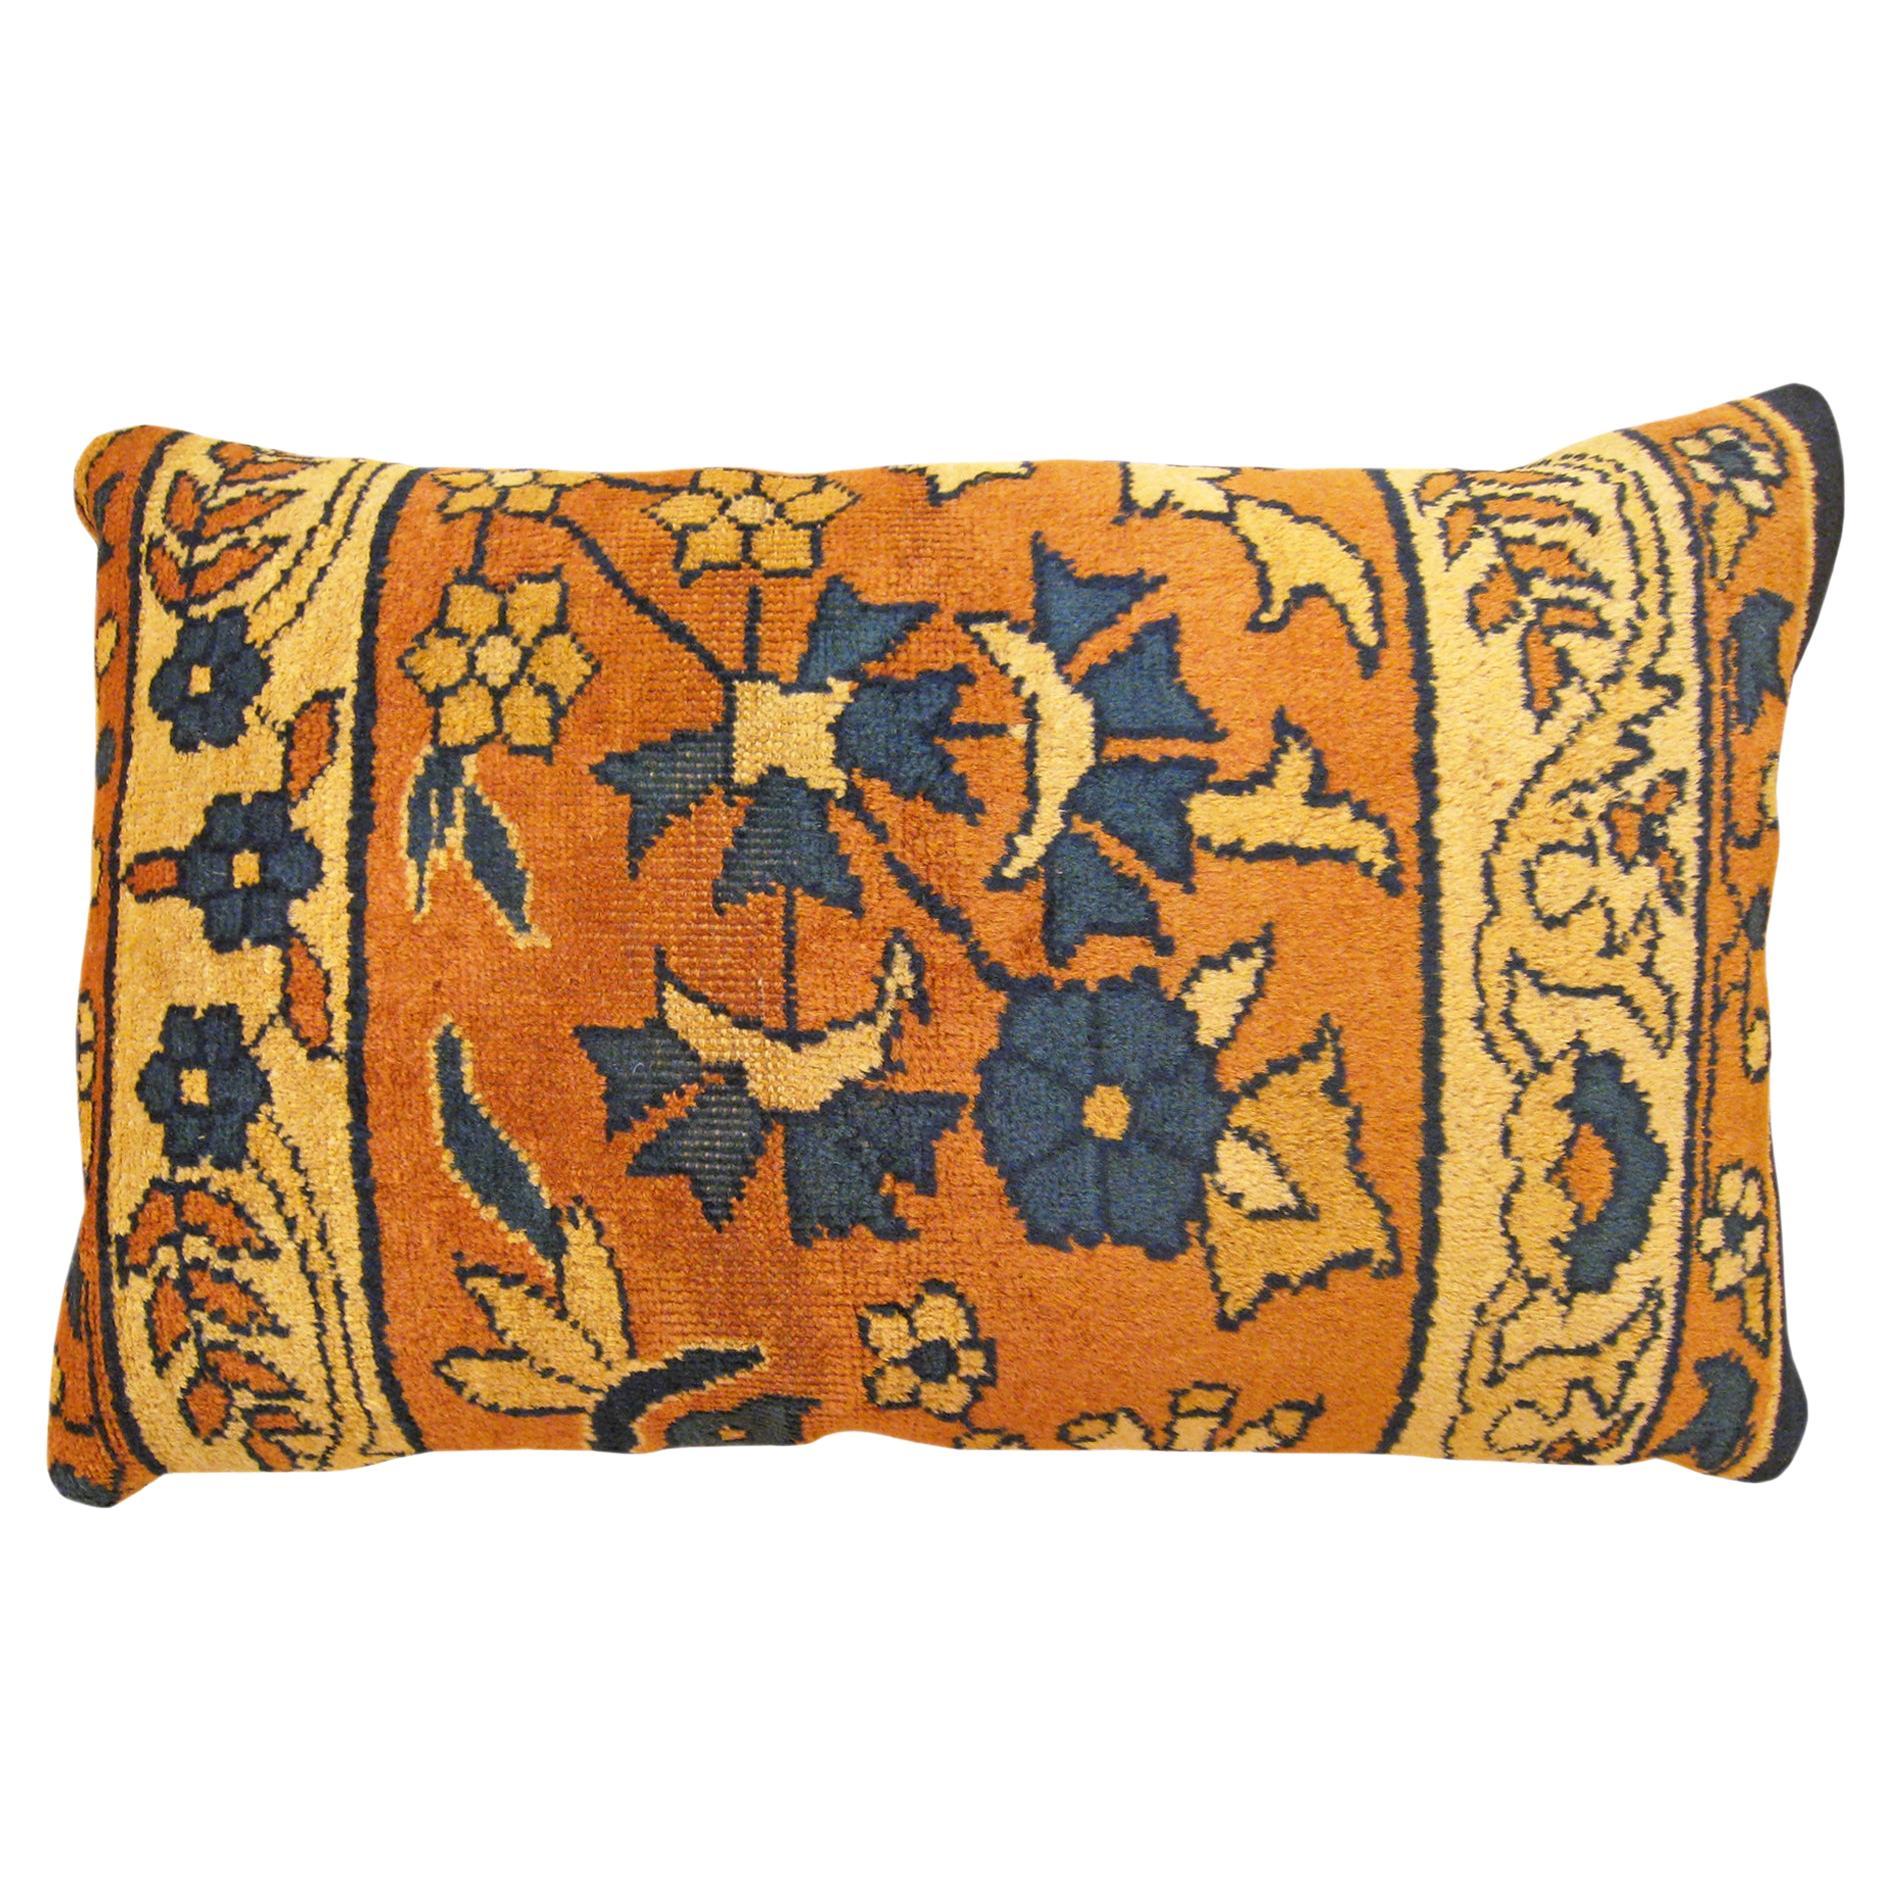 Decorative Antique Indian Agra Rug Pillow with Floral Elements Allover For Sale